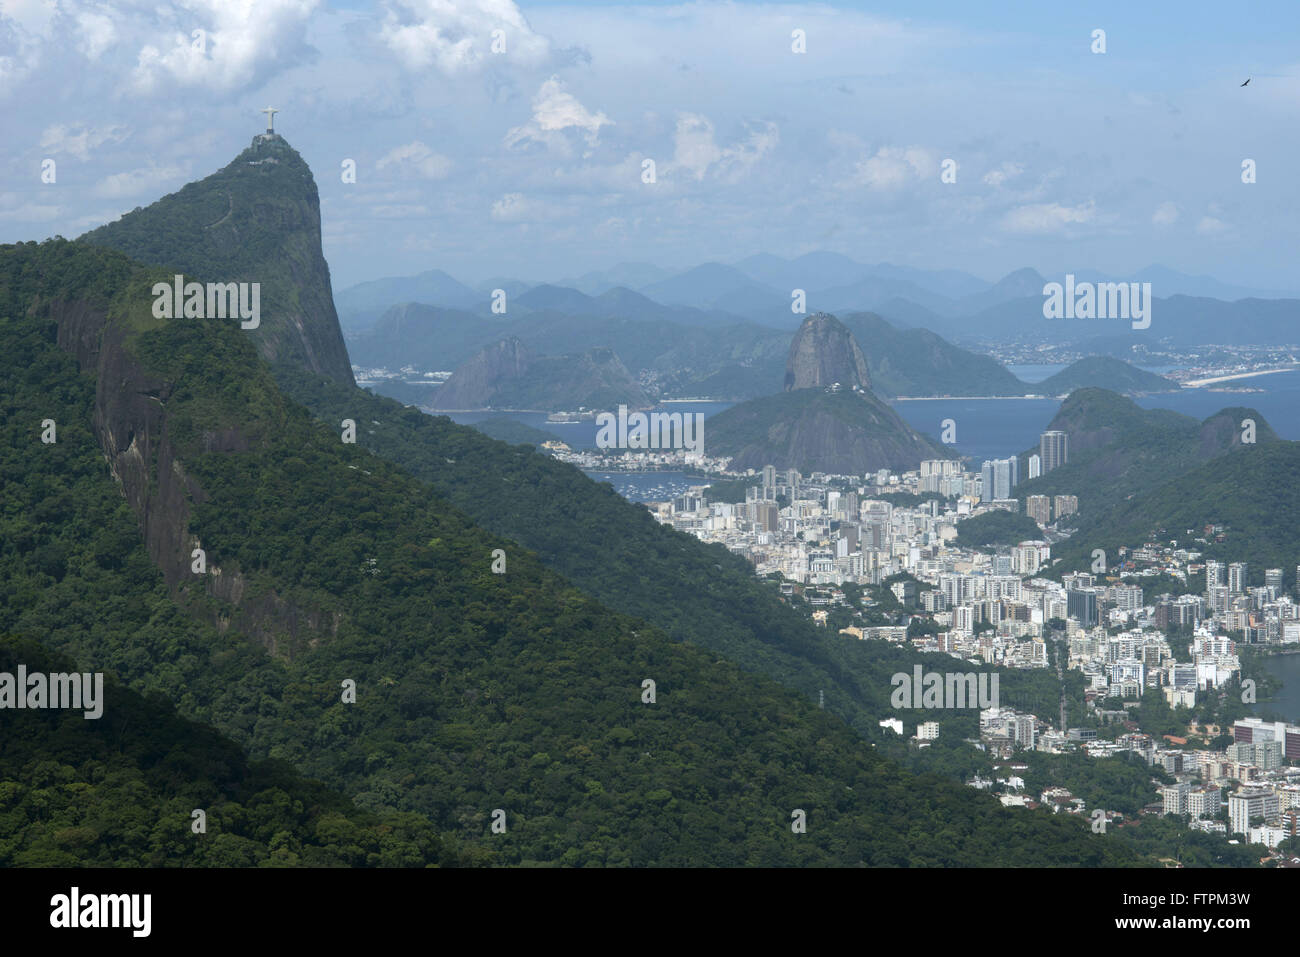 View of Morro do Corcovado and Pao de Acucar to the fund from Burnt Hill Stock Photo